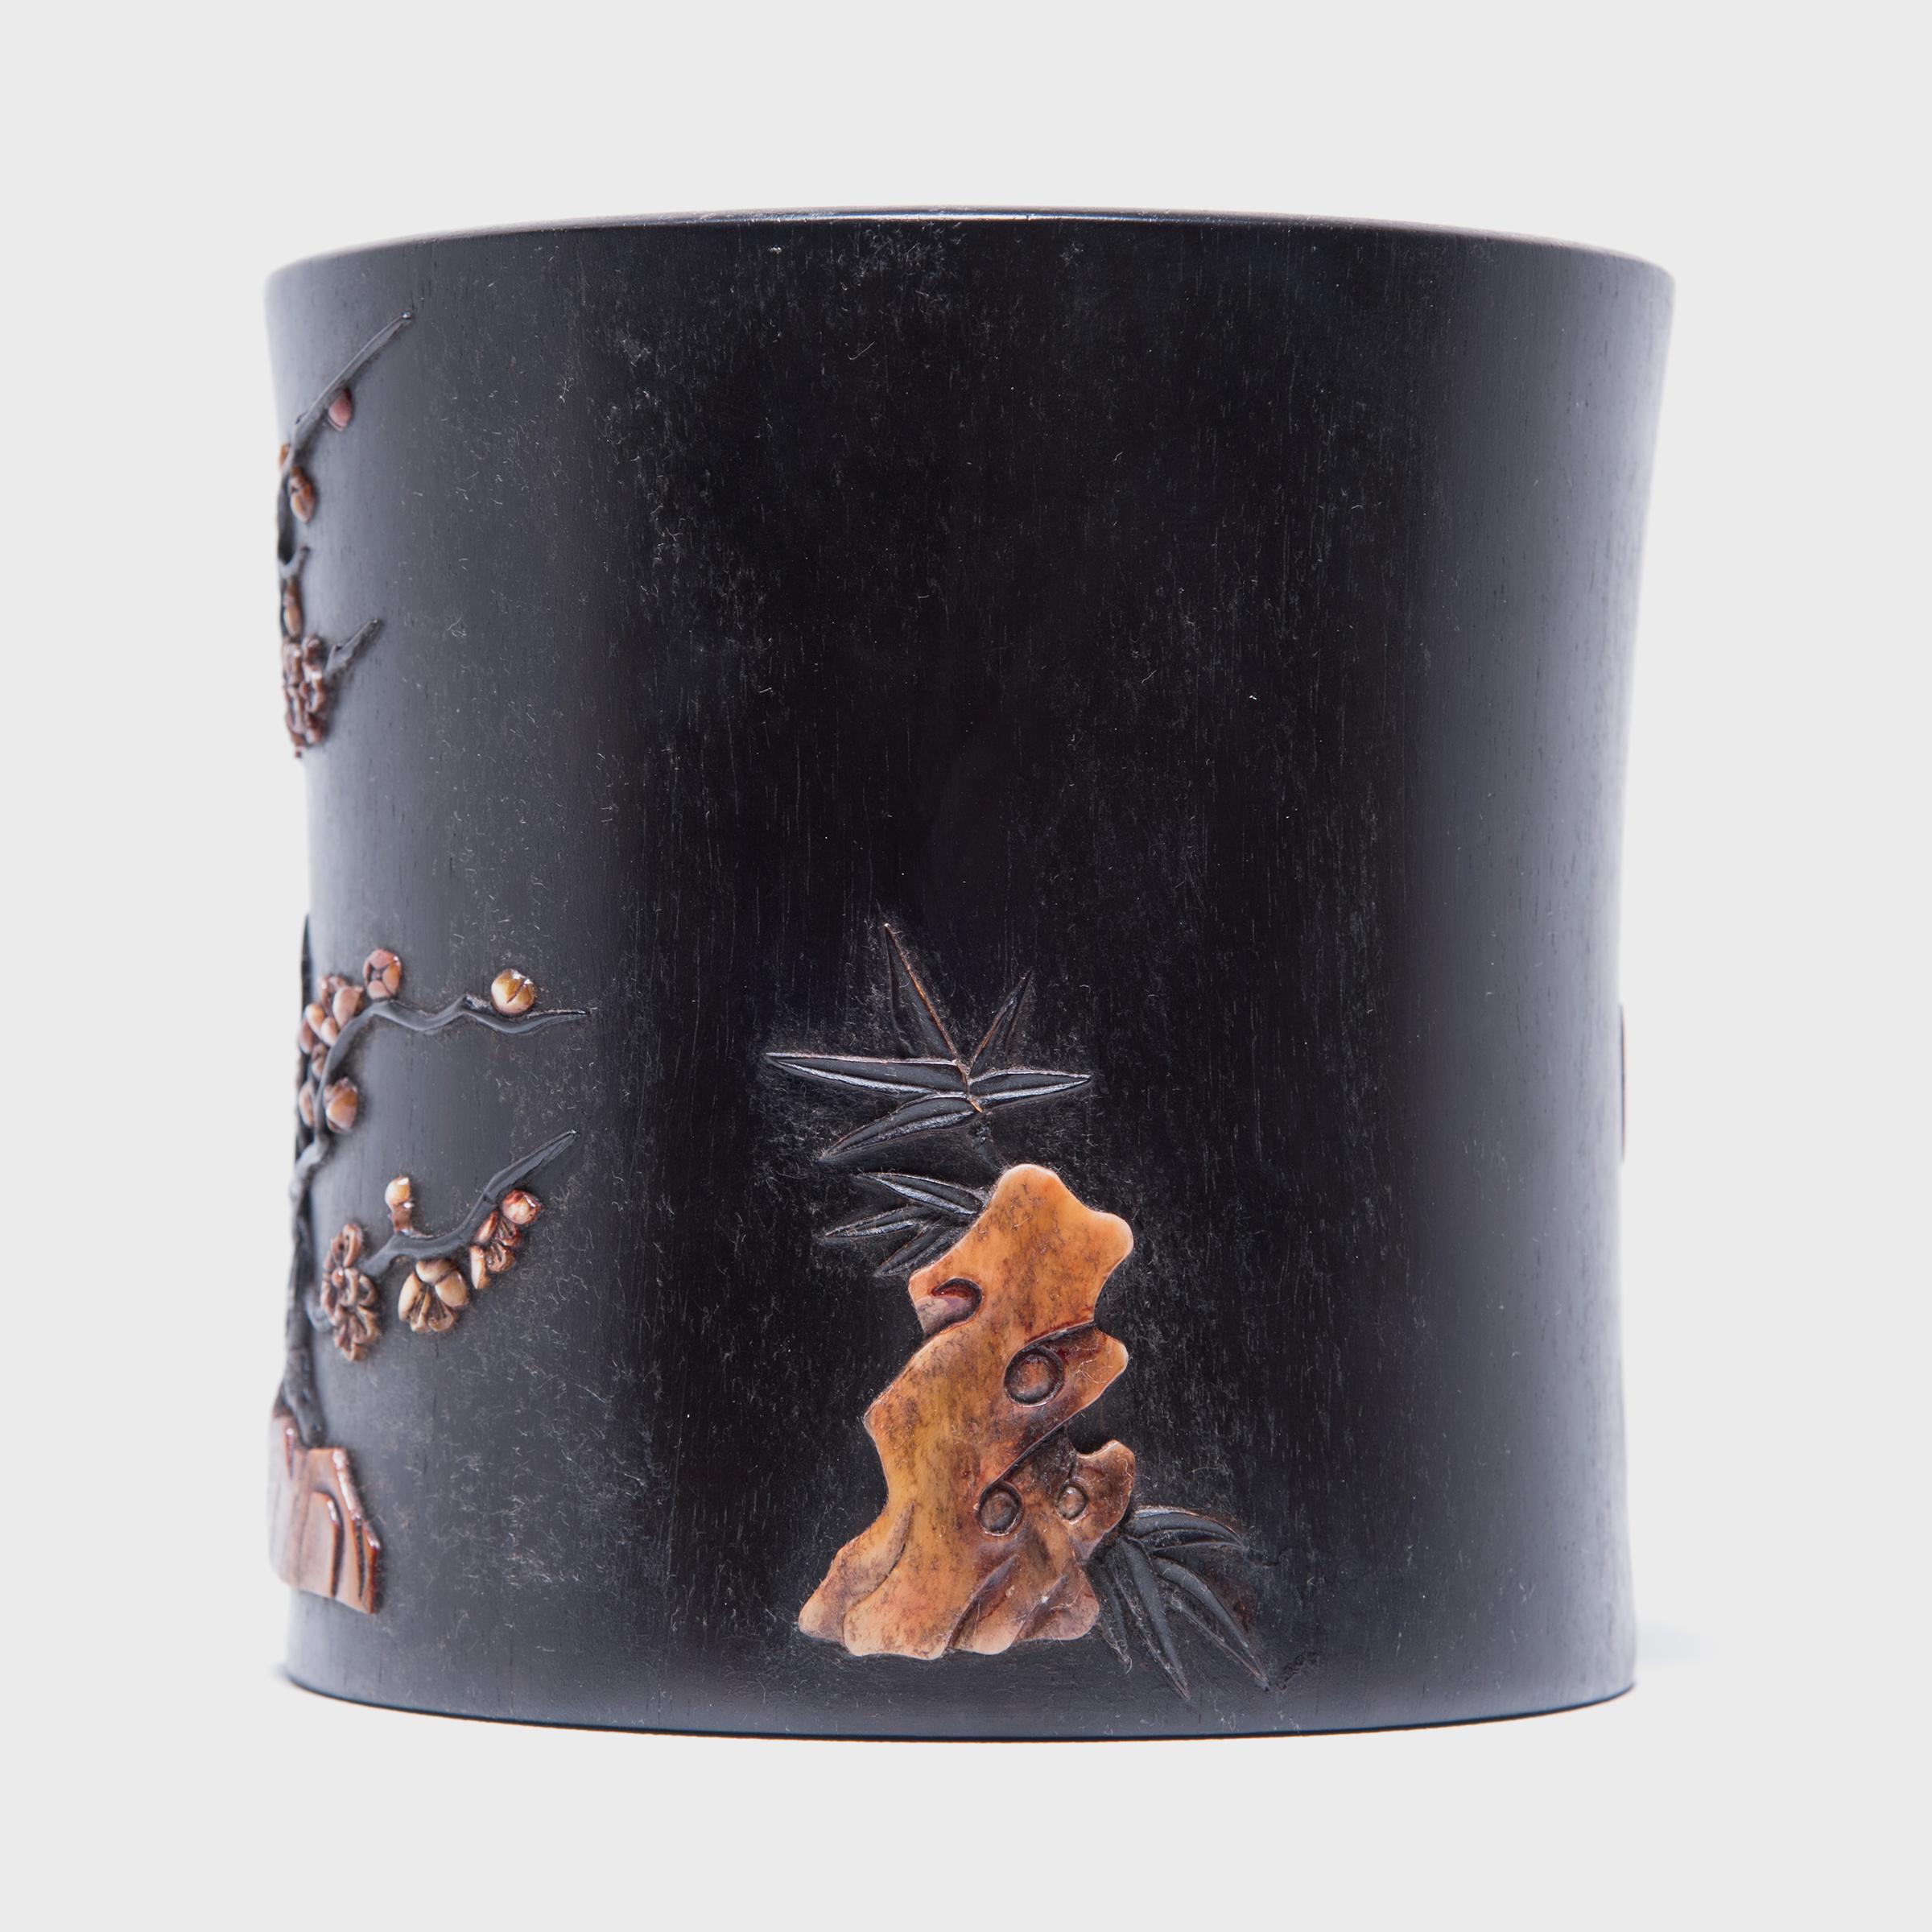 A brush pot or bitong, such as this one, was often found among a scholar’s brushes, inkpot, and inkstone. This beautiful example is carved from zitan, a highly prized rare and slow-growing hardwood. Mother of pearl and soapstone inlays embellish the